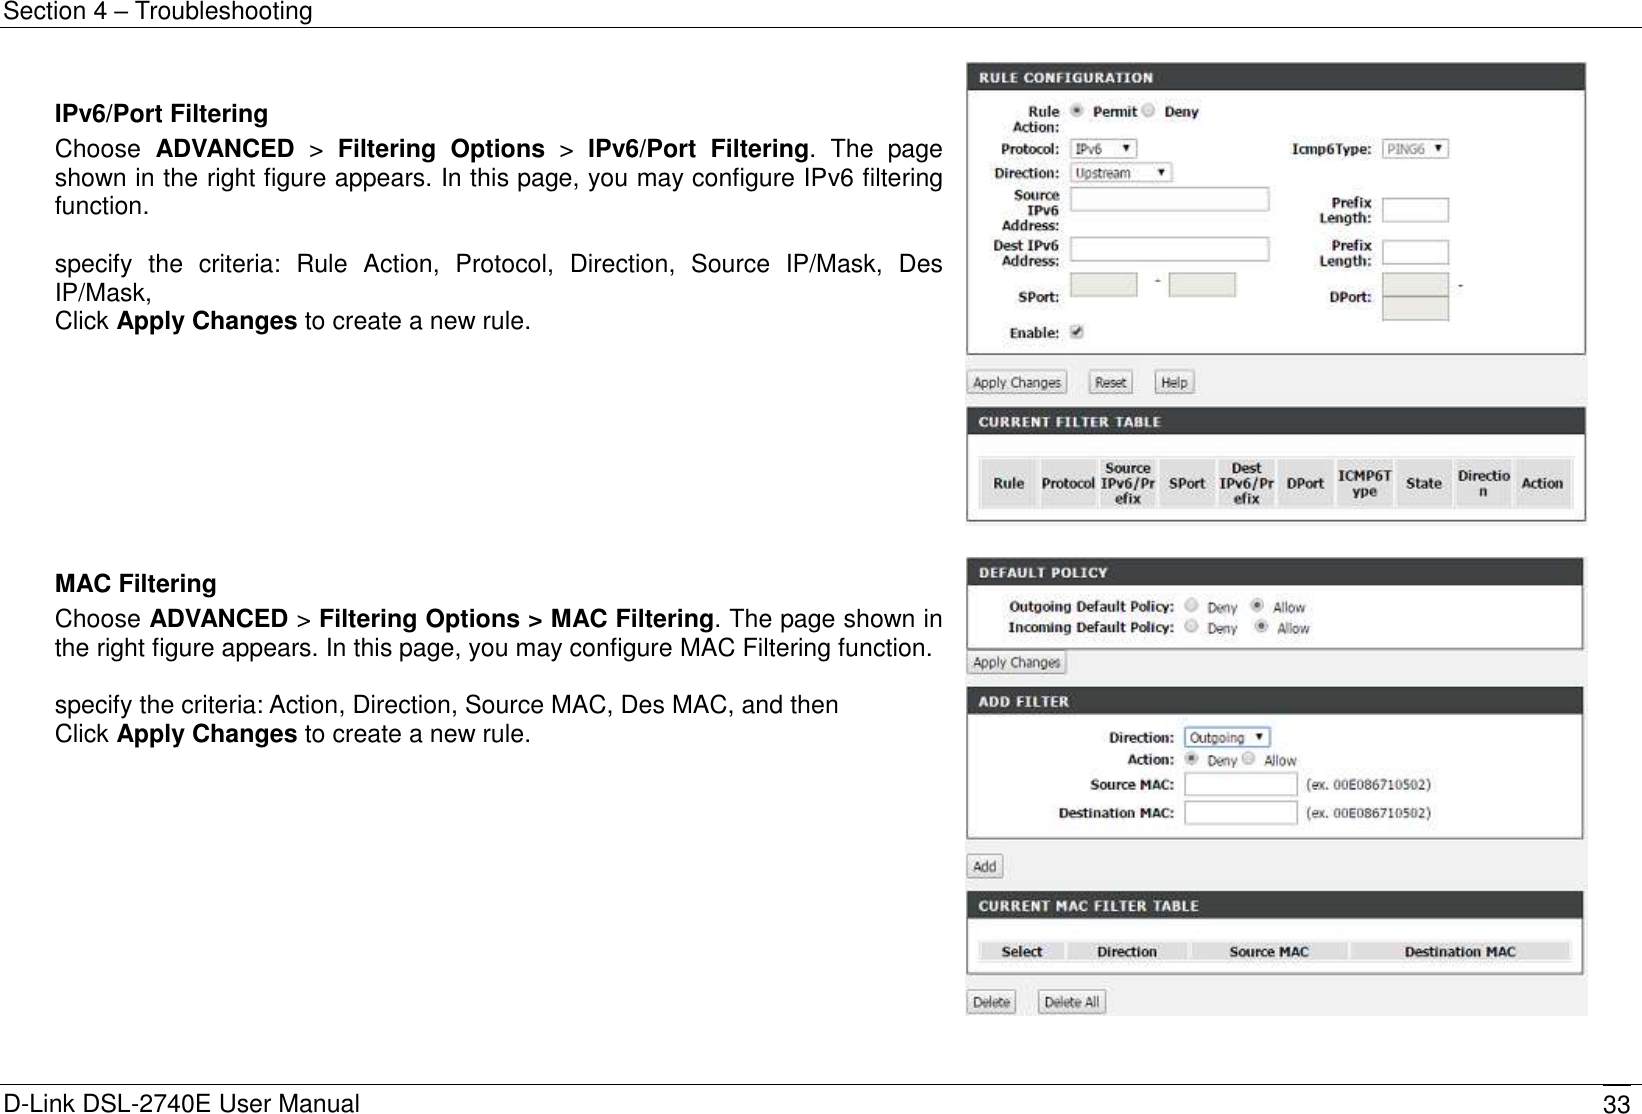 Section 4 – Troubleshooting D-Link DSL-2740E User Manual 33  IPv6/Port Filtering Choose  ADVANCED &gt;  Filtering  Options  &gt;  IPv6/Port  Filtering.  The  page shown in the right figure appears. In this page, you may configure IPv6 filtering   function.  specify  the  criteria:  Rule  Action,  Protocol,  Direction,  Source  IP/Mask,  Des IP/Mask,   Click Apply Changes to create a new rule.    MAC Filtering Choose ADVANCED &gt; Filtering Options &gt; MAC Filtering. The page shown in the right figure appears. In this page, you may configure MAC Filtering function.  specify the criteria: Action, Direction, Source MAC, Des MAC, and then   Click Apply Changes to create a new rule.   